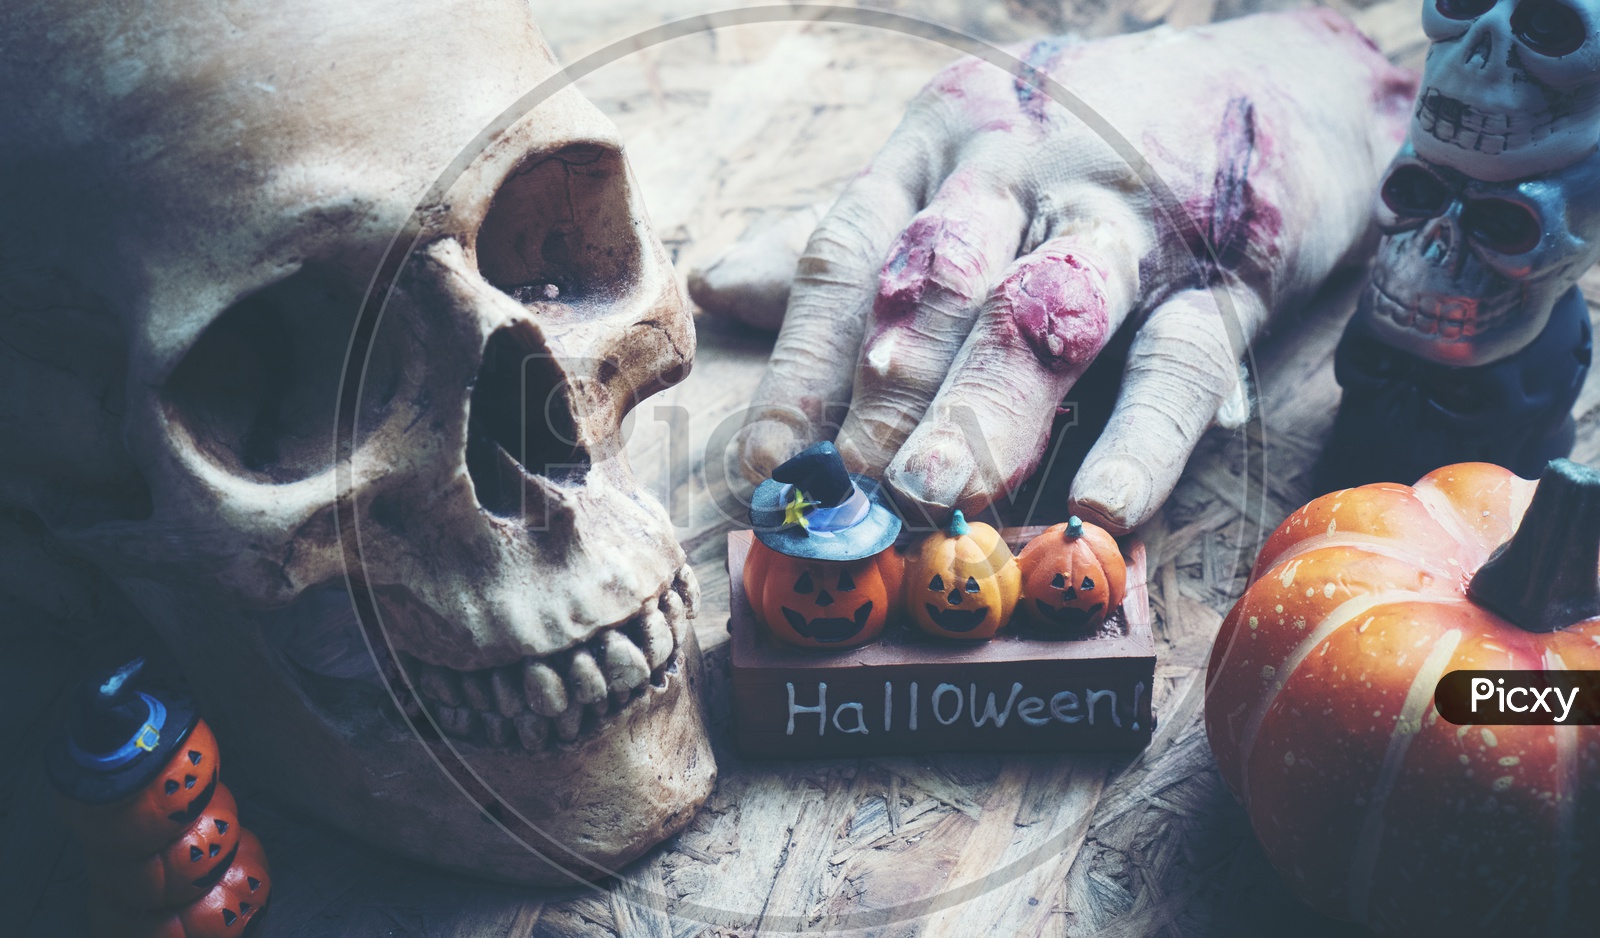 Artistic Background For Halloween  With Skull And  Pumpkin  With Vintage  Filter